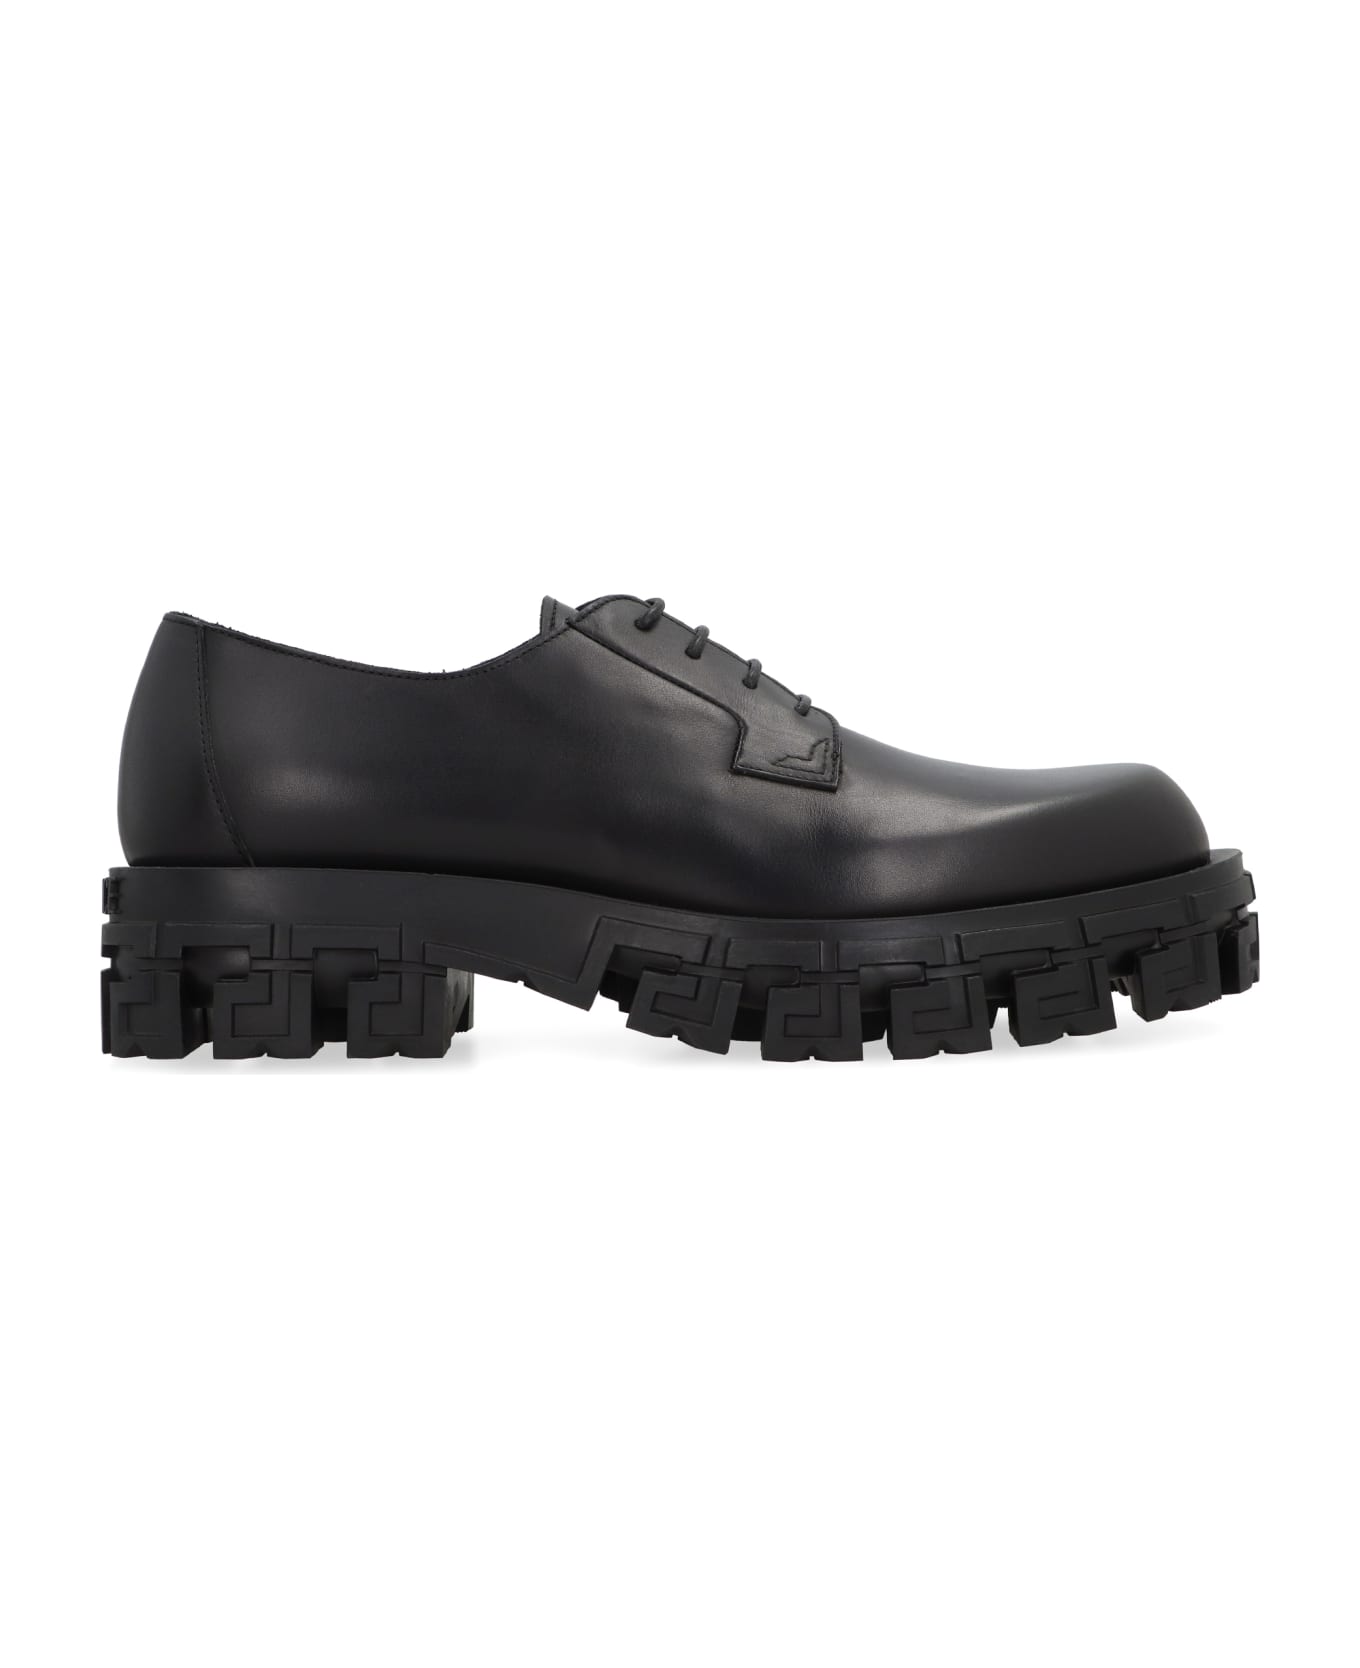 Versace Leather Lace-up Derby Shoes - black レースアップシューズ